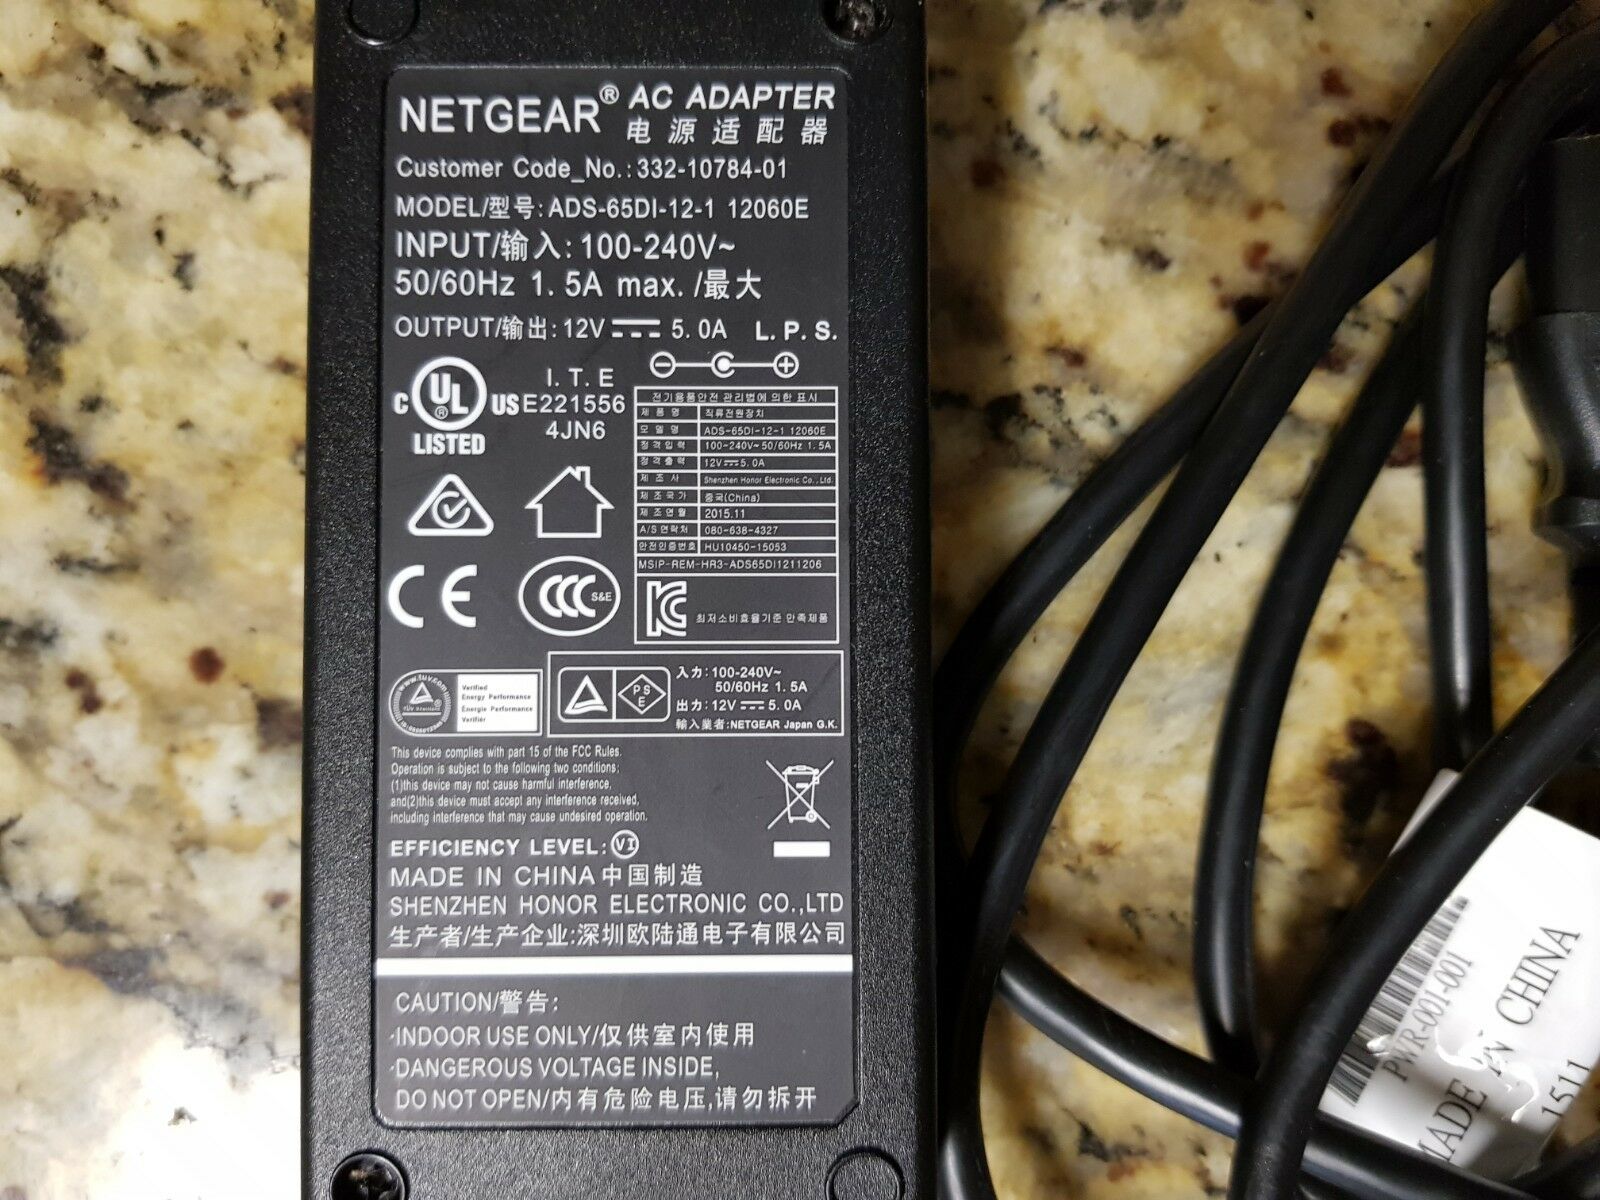 Brand new NETGEAR 12V 5.0A 332-10384-01 AC ADAPTER 5.5*2.1mm for NIGHTHAWK X6 ROUTER R8000 R8000 Ro